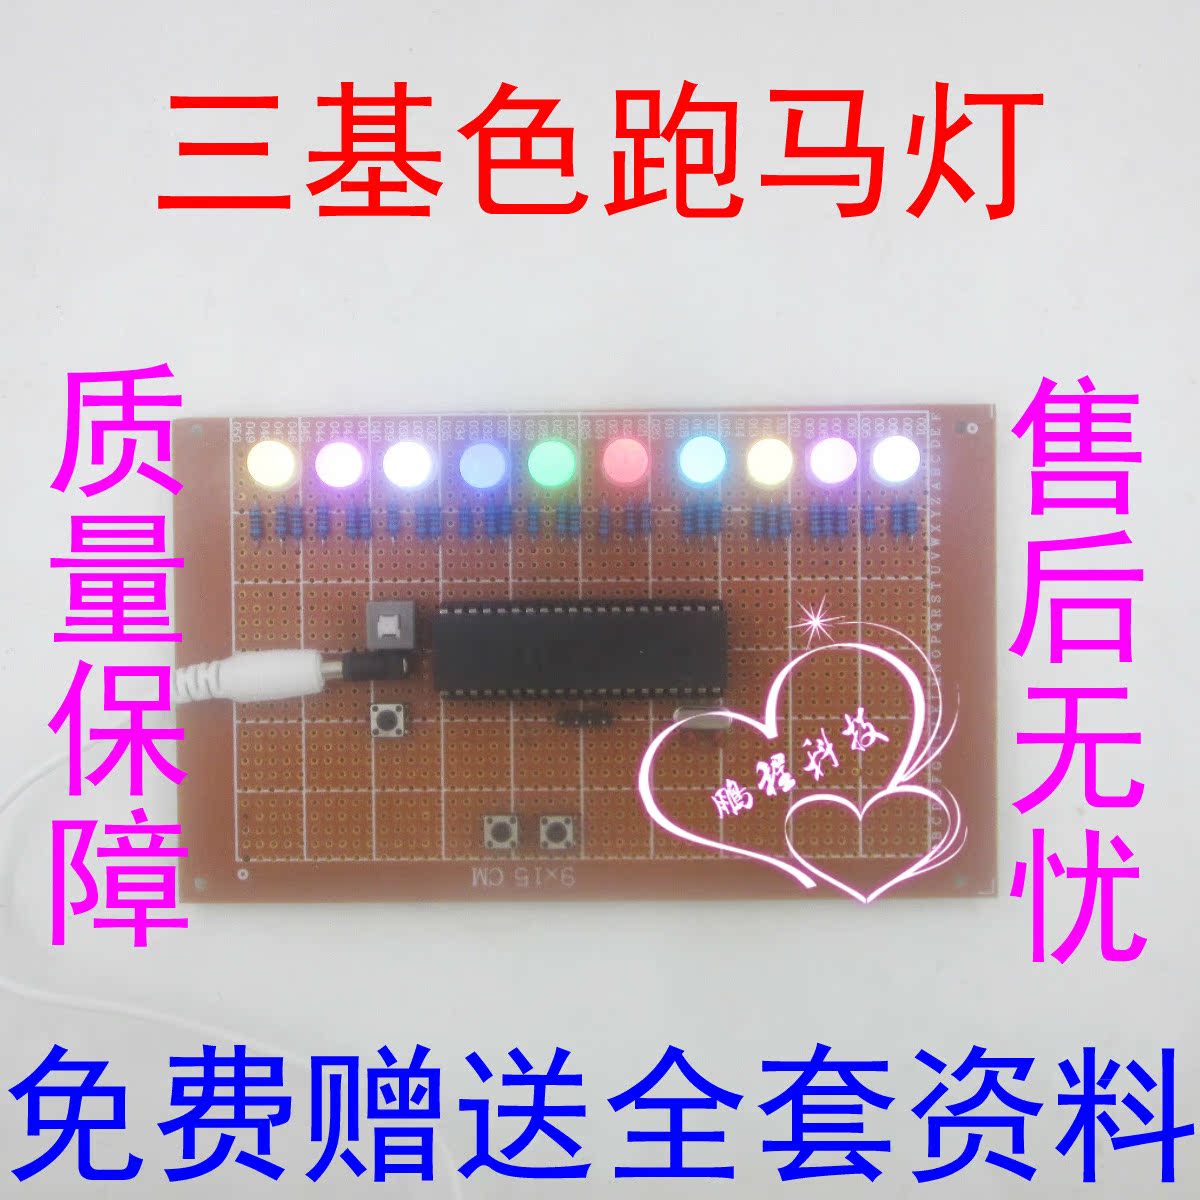 Design of RGB Full-color Streaming Lamp Based on 51 Single Chip Microcomputer DIY Seven-color Lamp Electronics